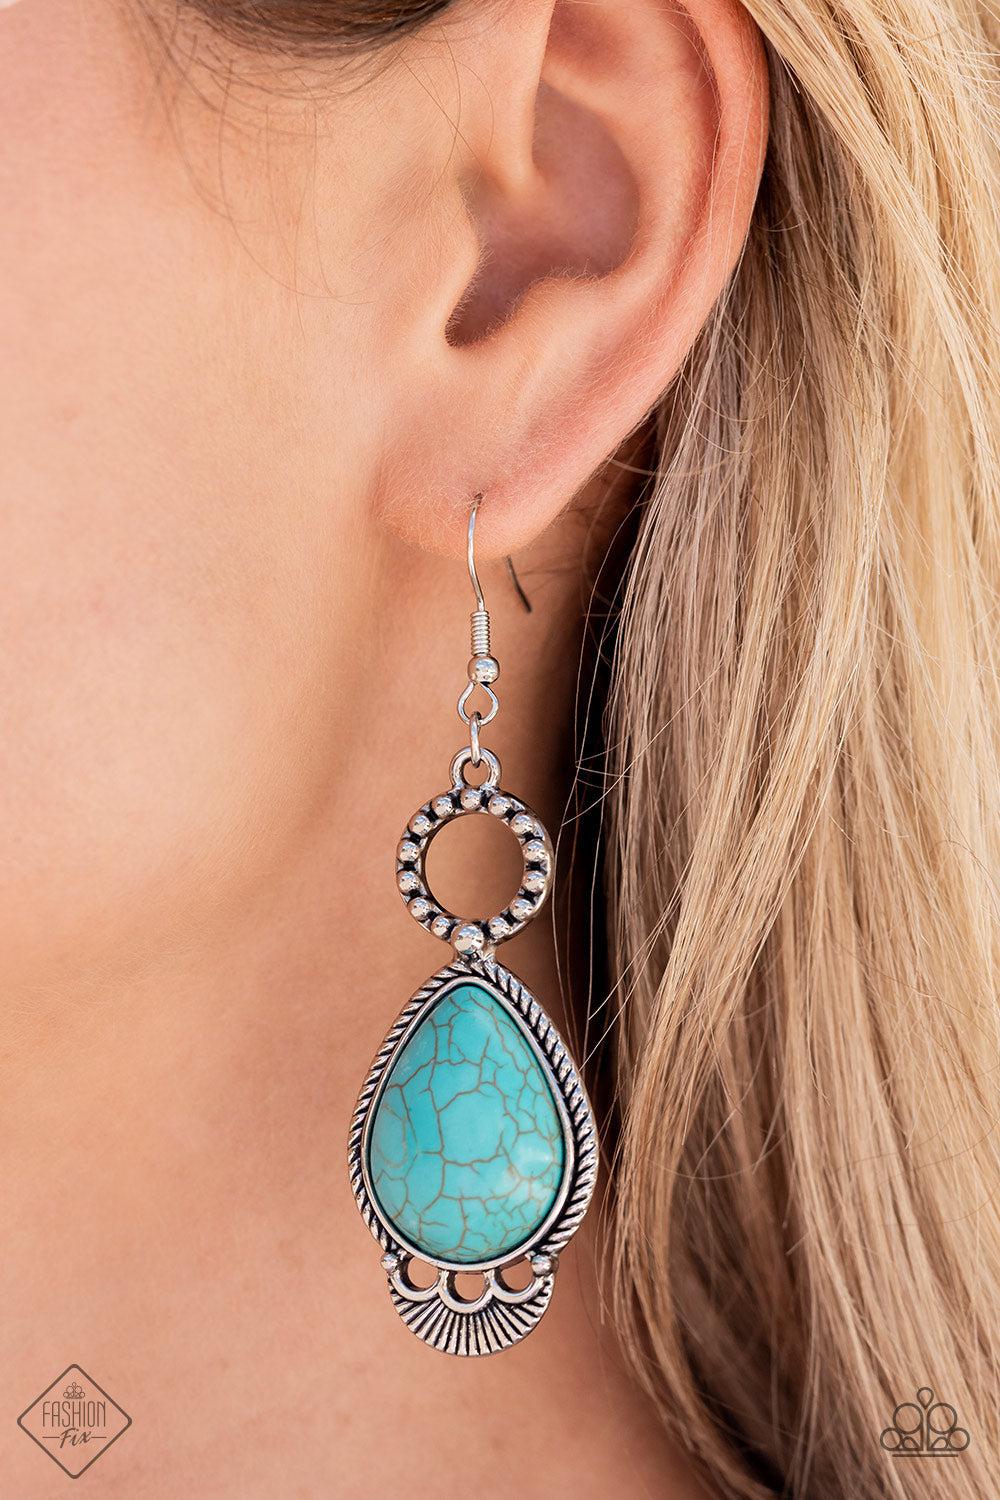 River Cruzin Turquoise Blue Stone Earrings - Paparazzi Accessories-on model - CarasShop.com - $5 Jewelry by Cara Jewels